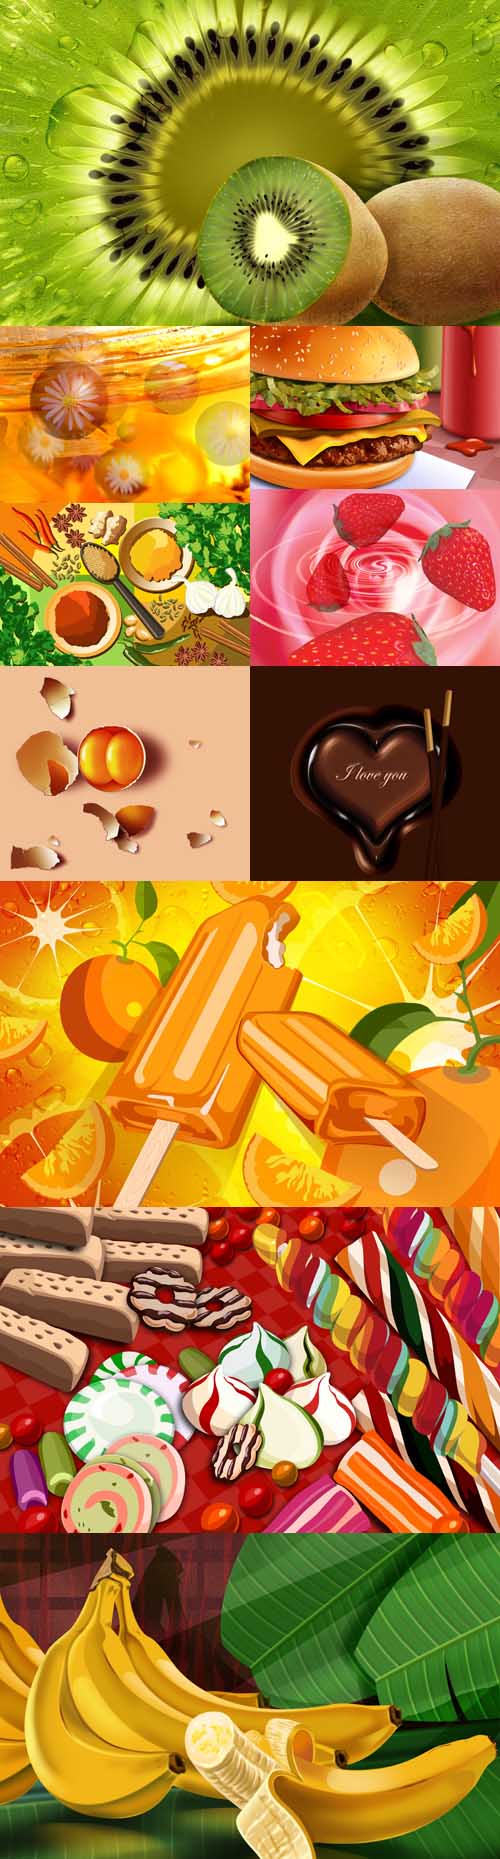 Collection of fruits and sweets Psd Sources for Photoshop